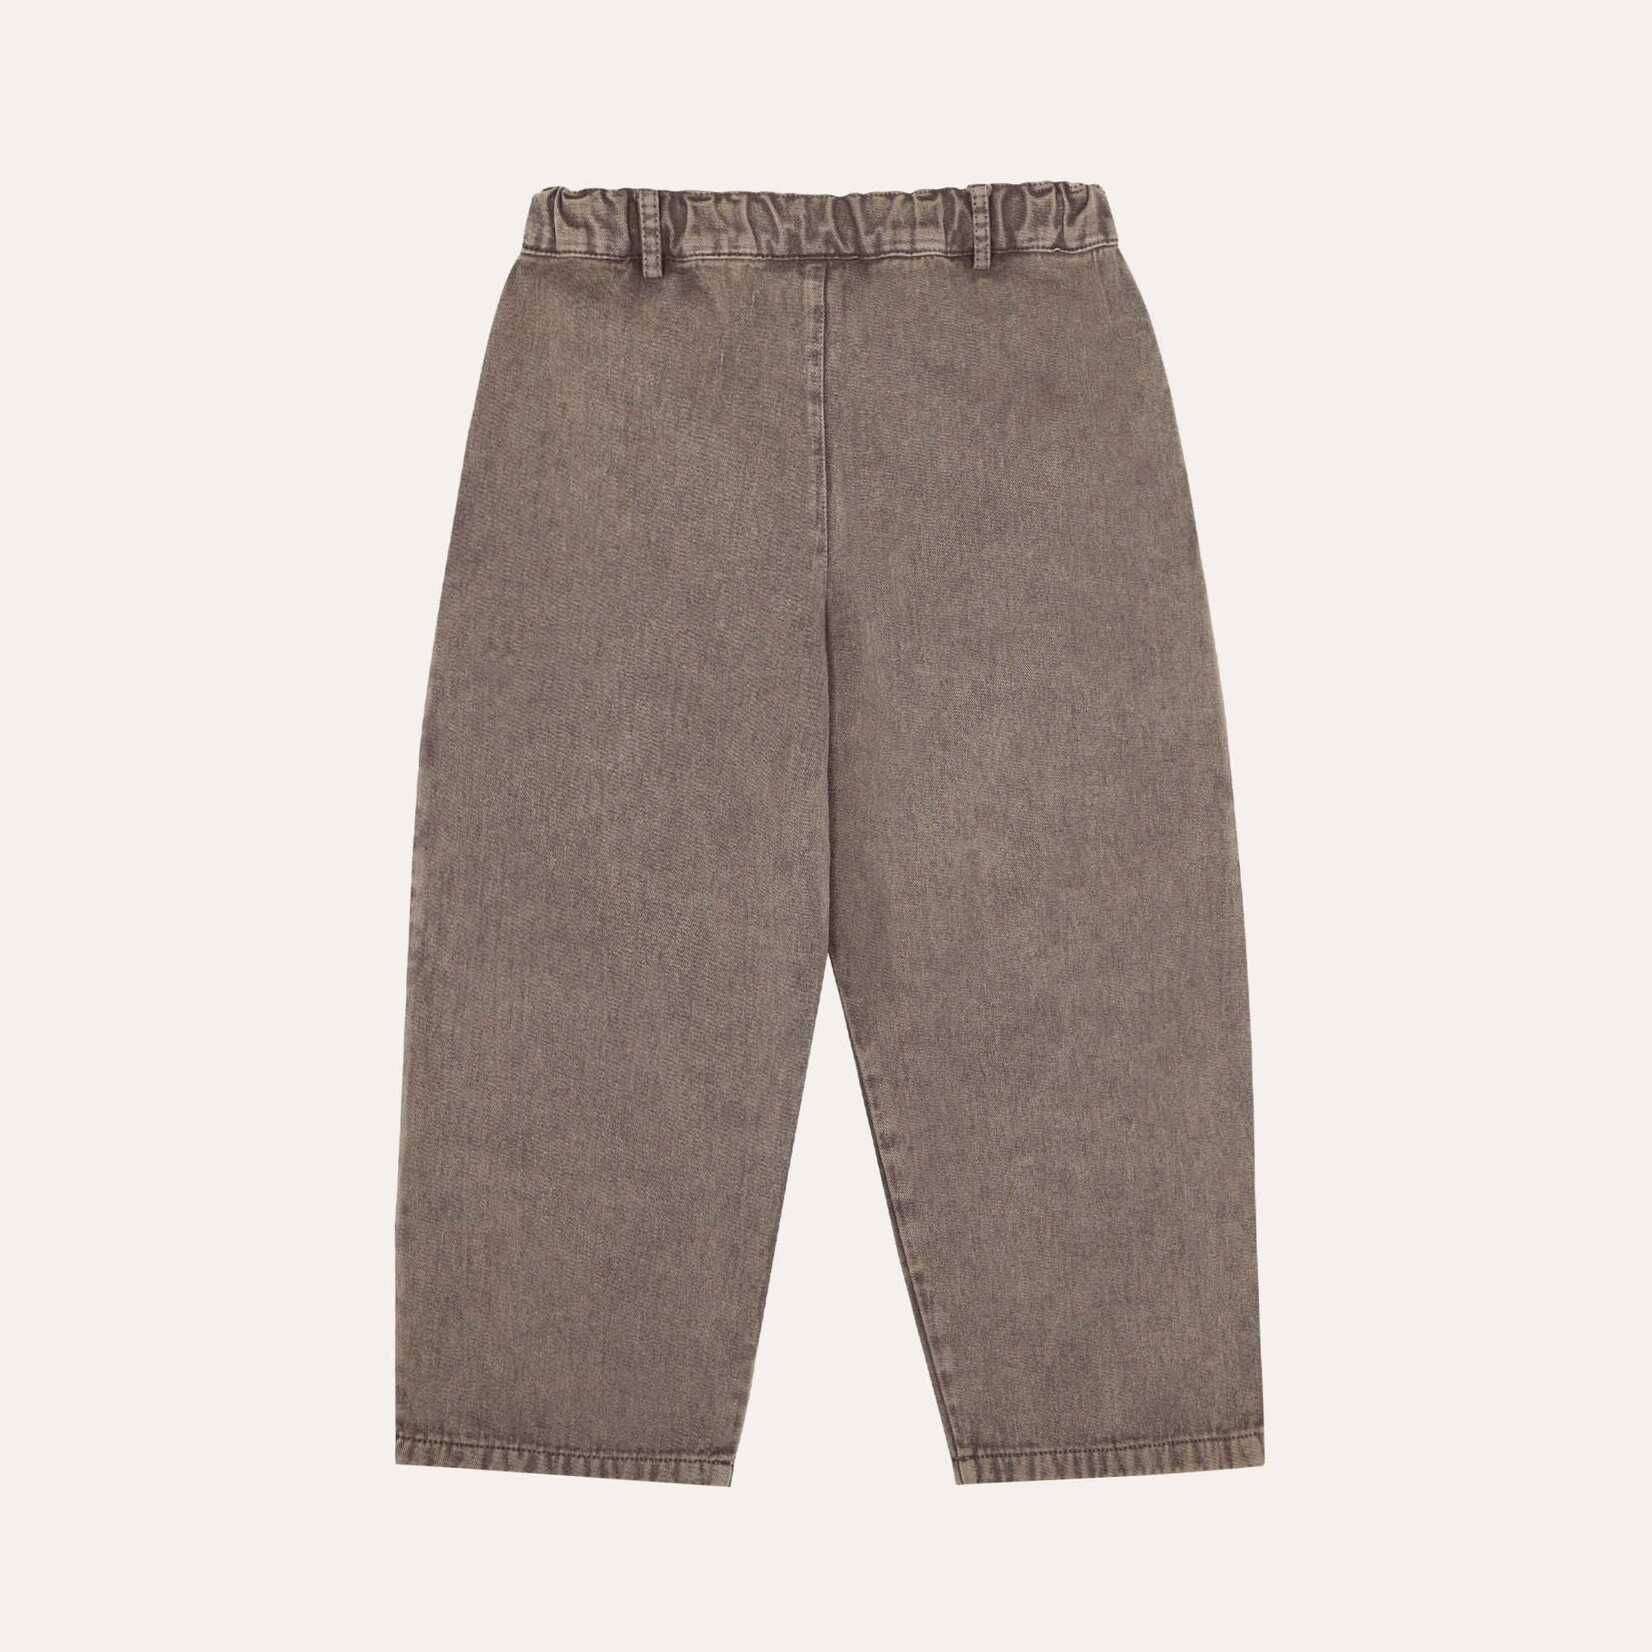 The Campamento Trousers - brown washed